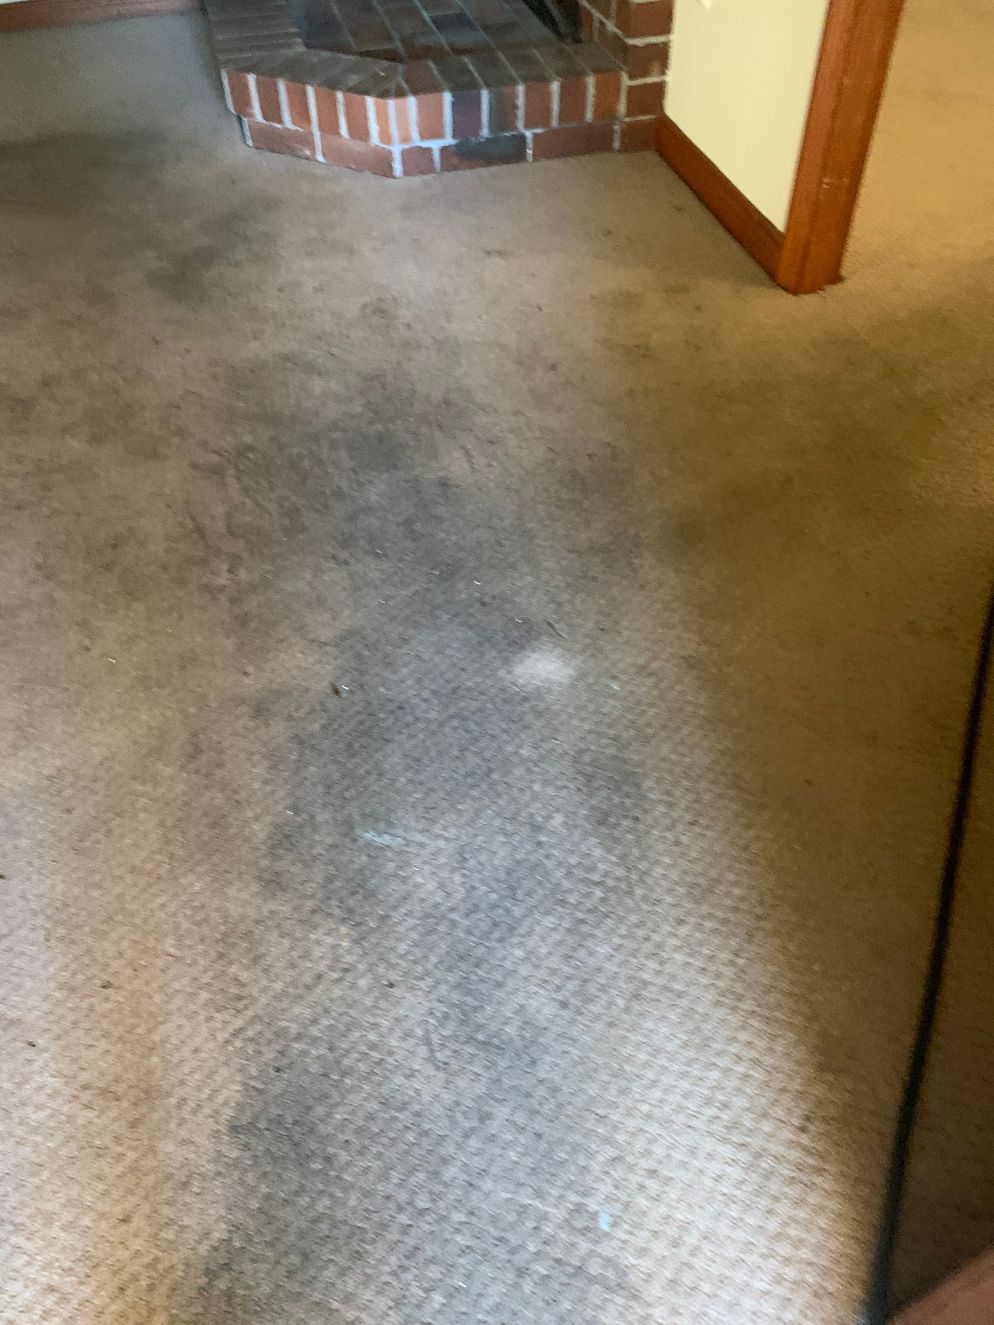 Dirty Carpet Before Cleaning — Carpet Cleaning in Wollongong, NSW